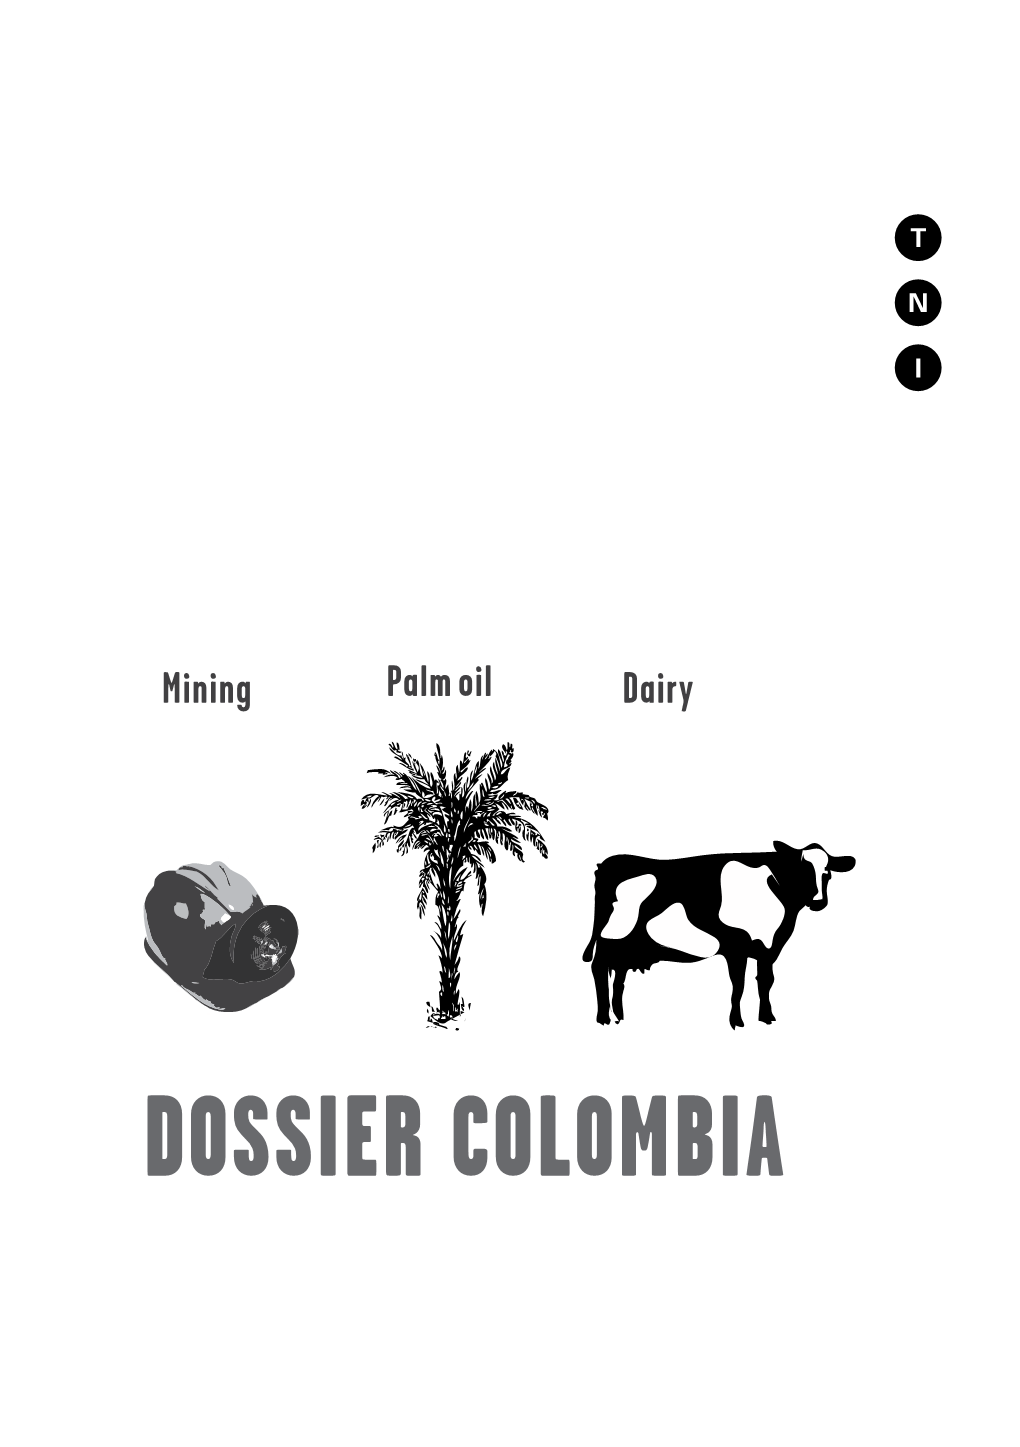 Dossier Colombia